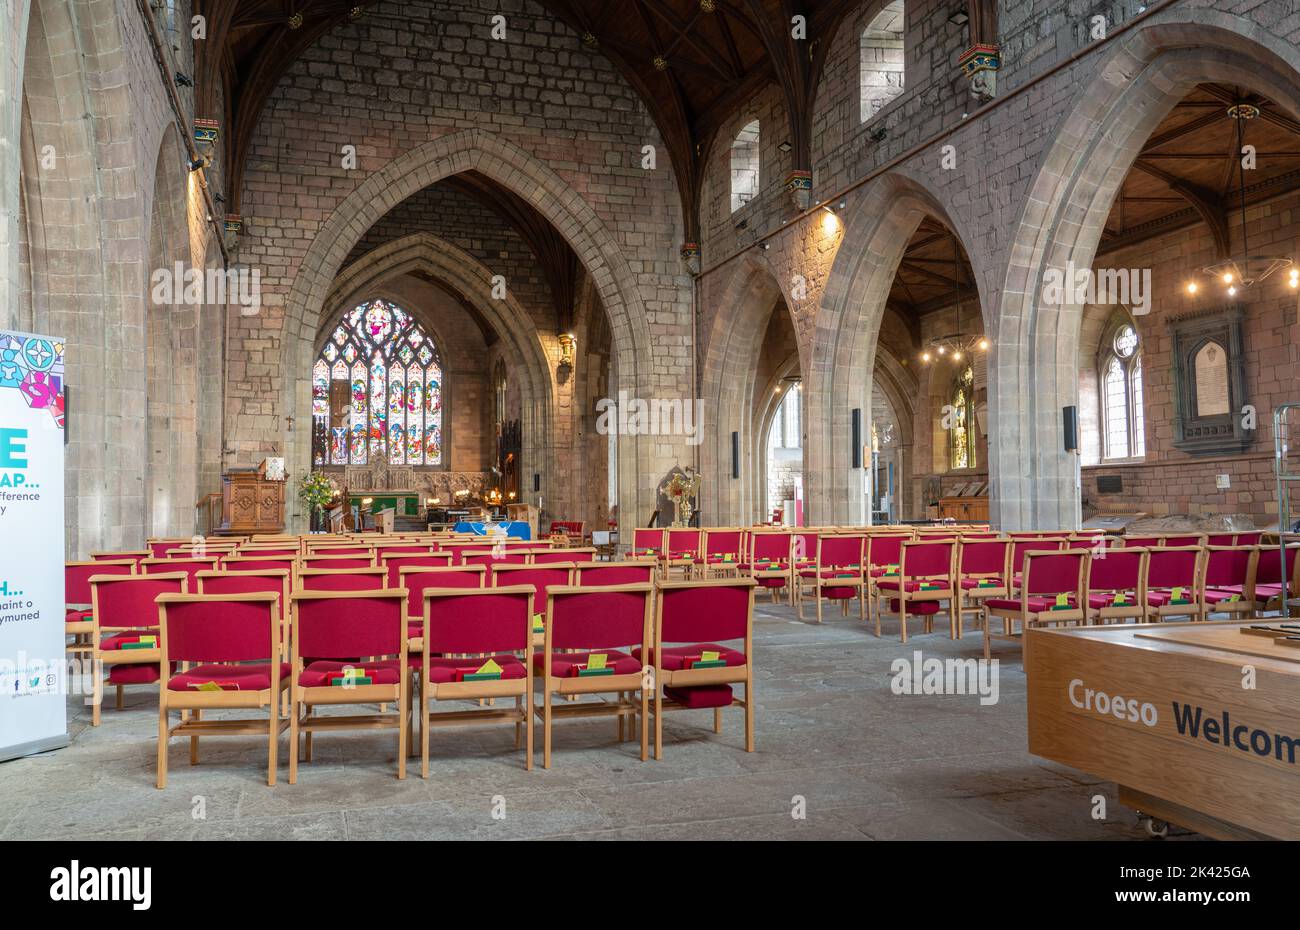 St Asaph Cathedral, North Wales. The Building dates back to the 13th Century. Image taken in February 2022. Stock Photo